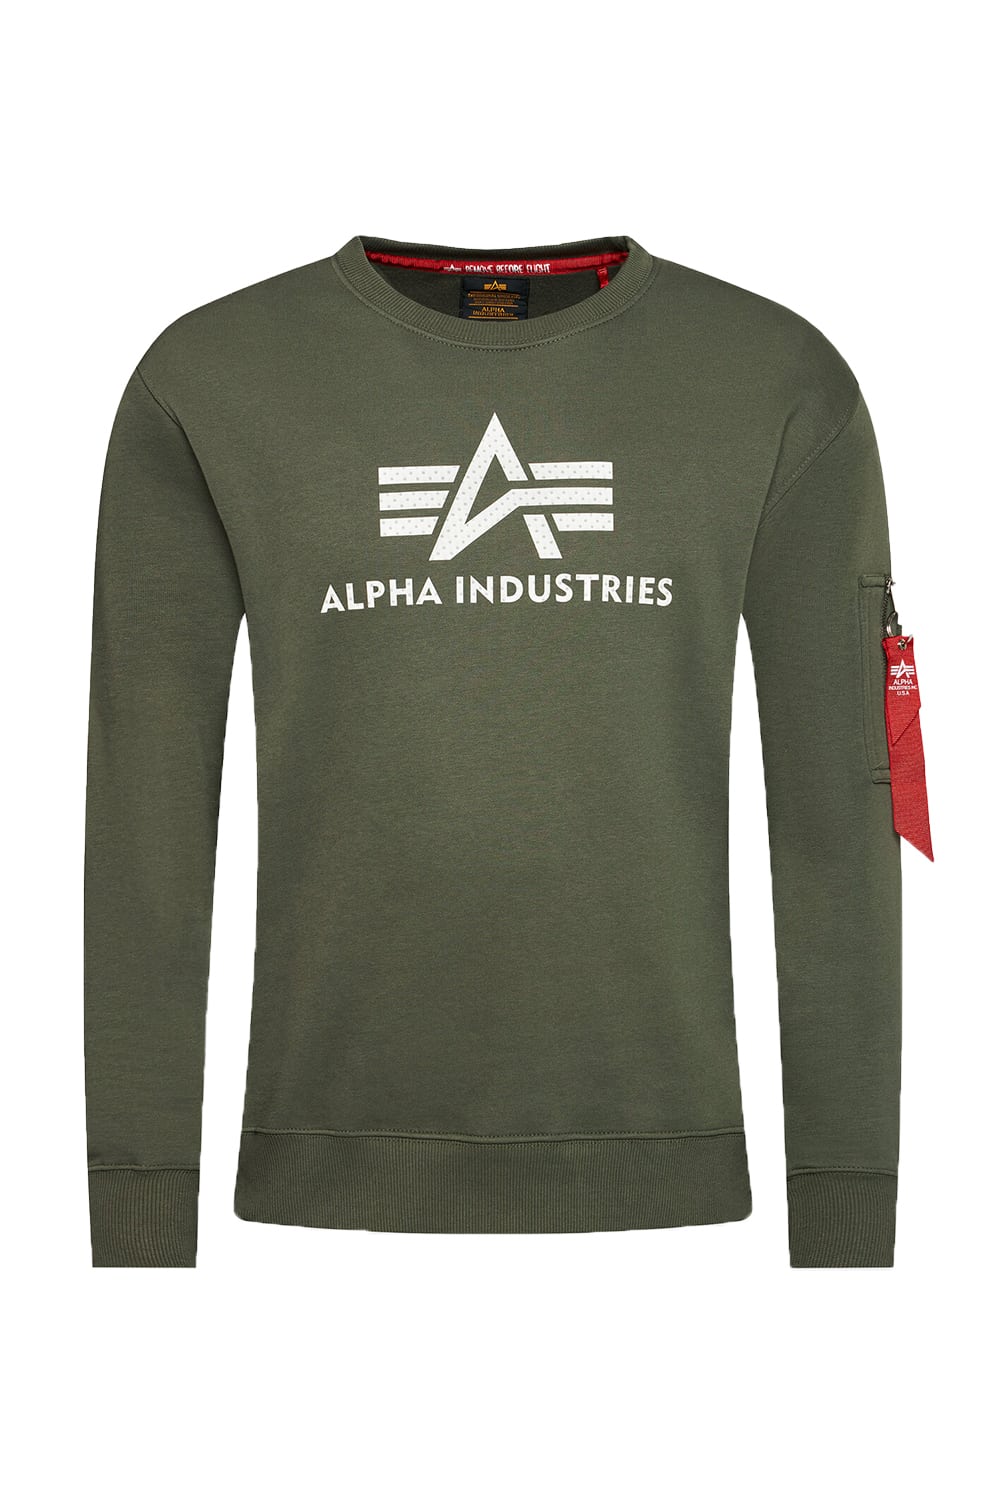 industries Clothes black Exclusive sweater teddy - Alpha